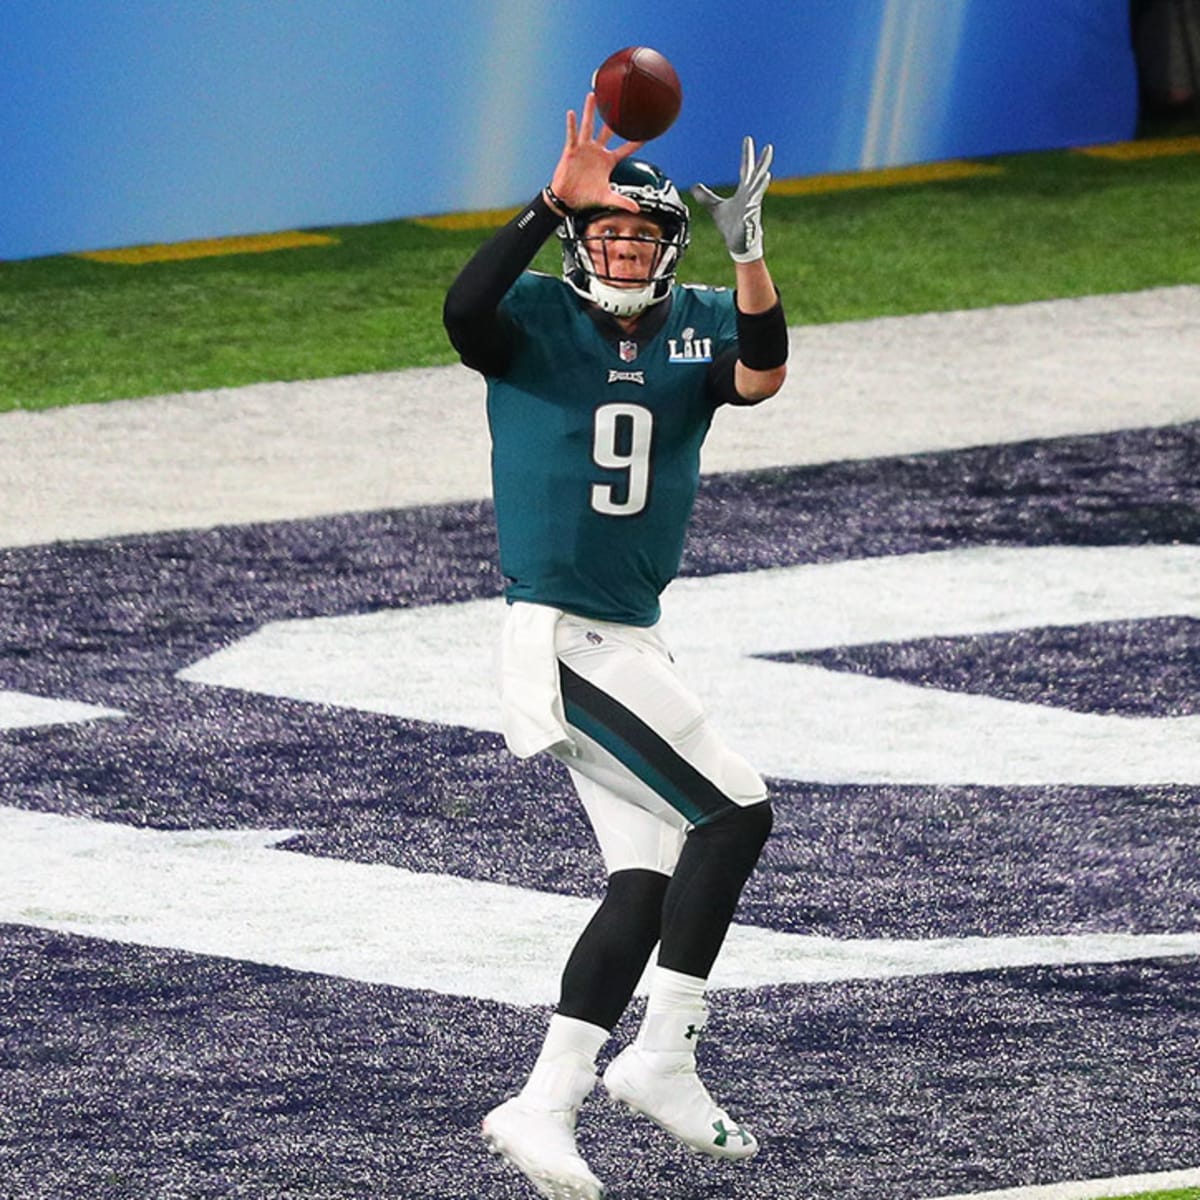 Eagles file to trademark Philly Special phrase for Super Bowl play